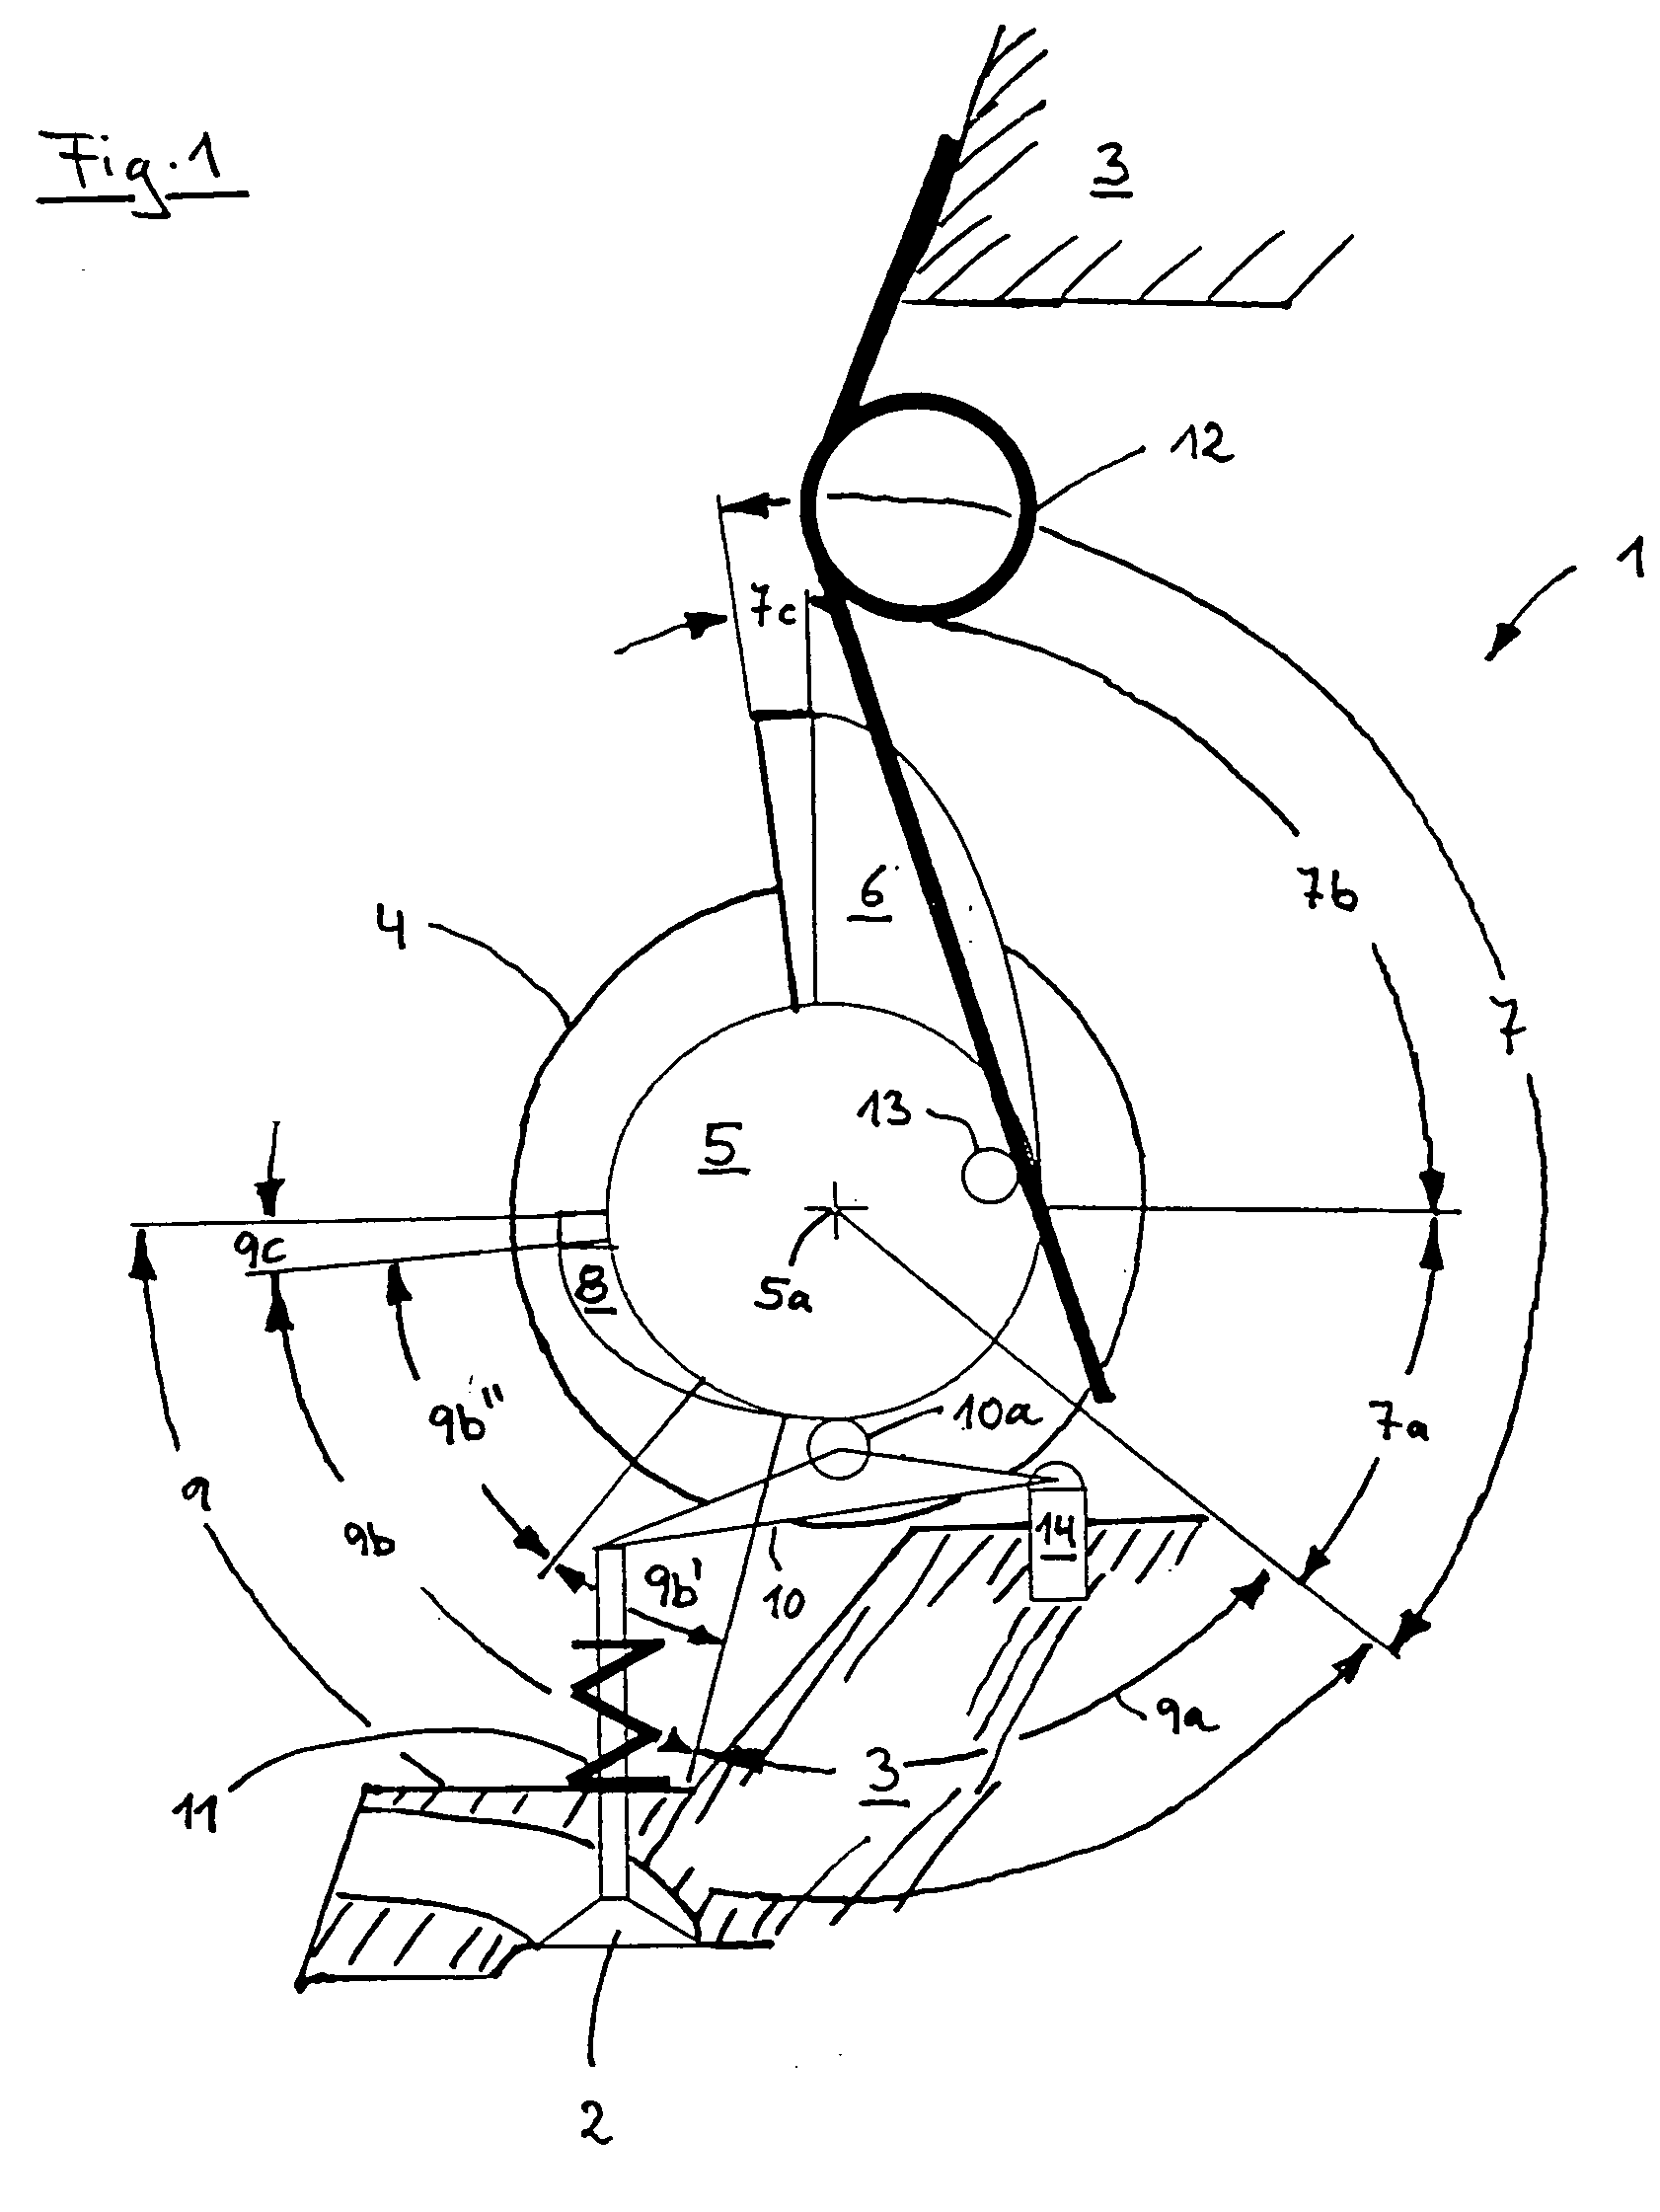 Pivoting actuator system for controlling the stroke of a gas exchange valve in the cylinder head of an internal combustion engine